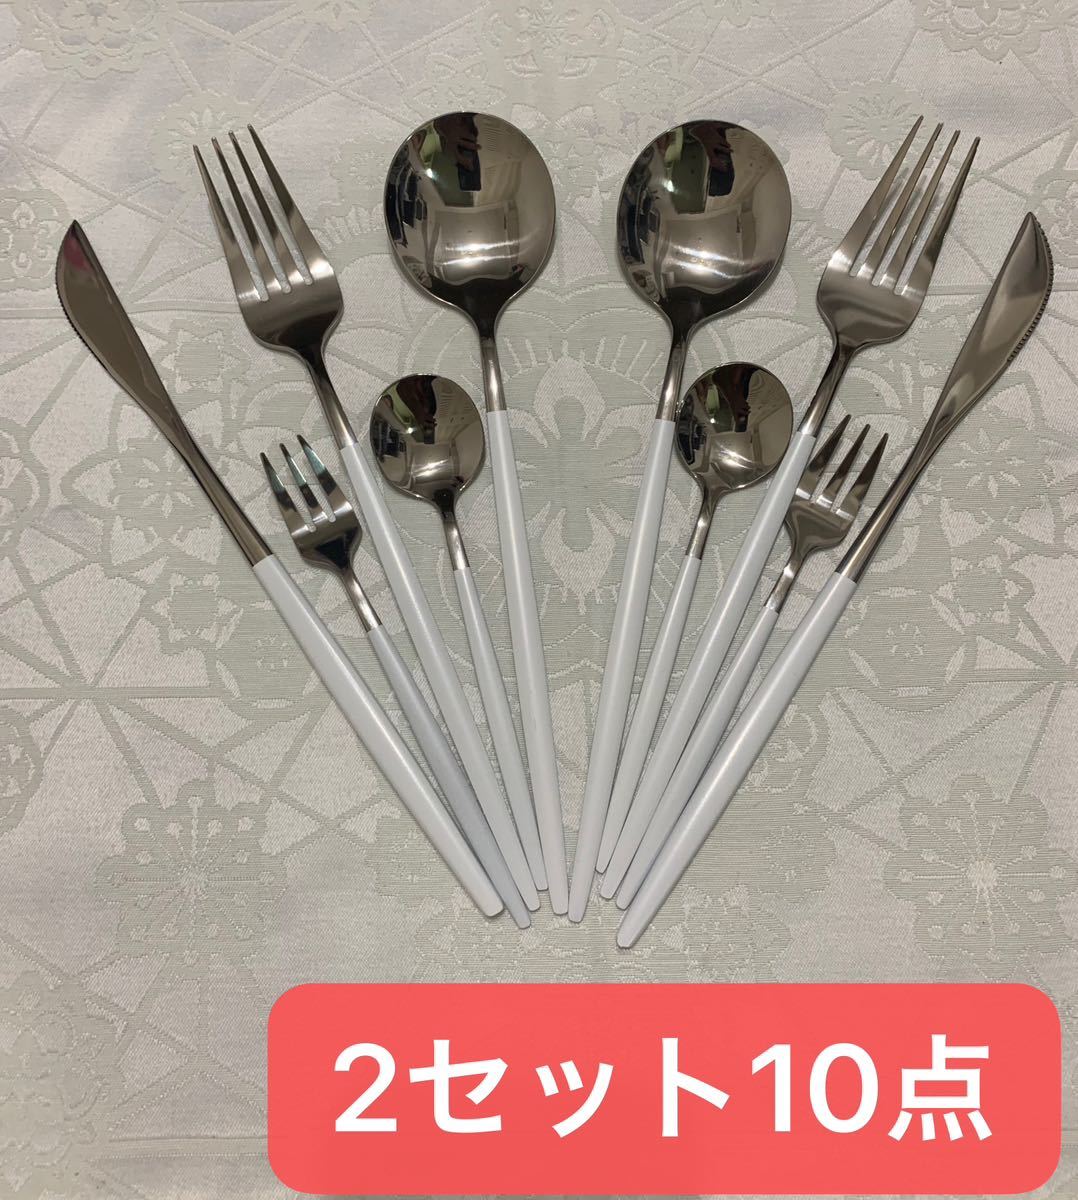  cutlery set tina- Northern Europe manner spoon Fork knife 2 set 10ps.